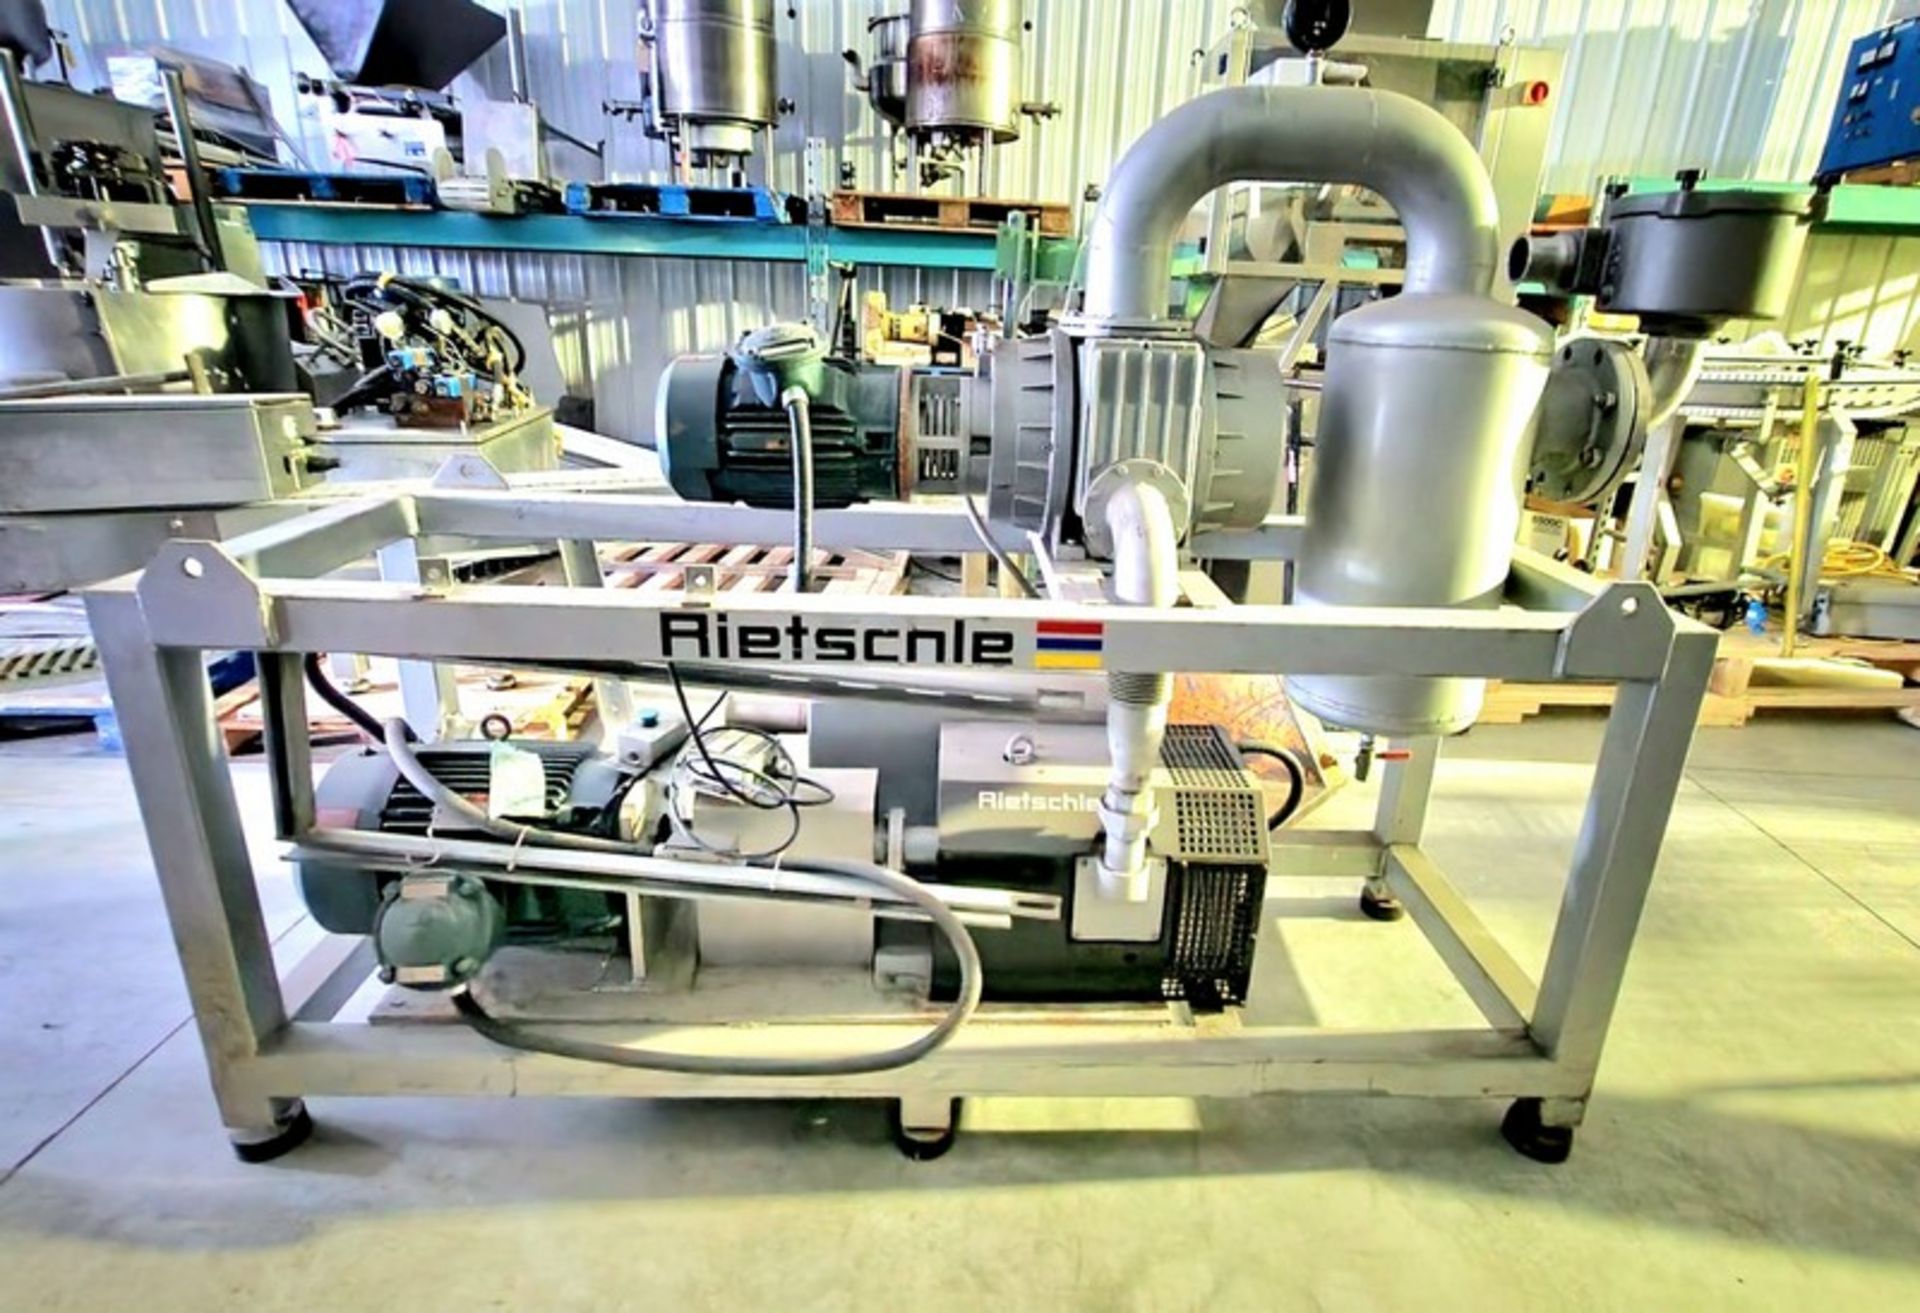 Rietschle Vacuum System modele VC300 01, 02567-0113 TYPE 1000 575volts / 5.20 / 3PH /60Hz 1 / SF 1, - Image 5 of 11